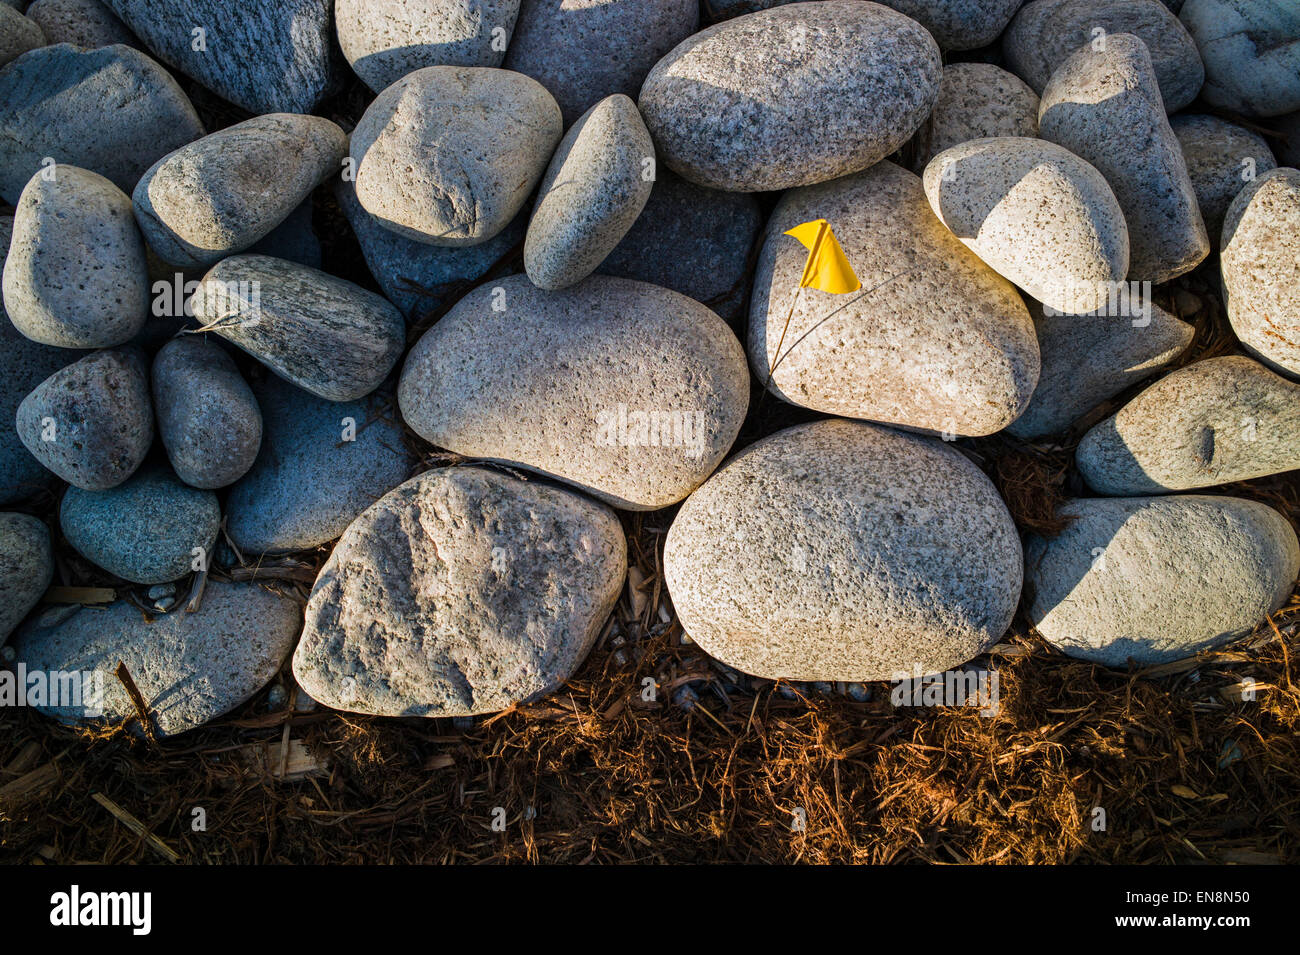 River rocks used as landscaping stones in the garden of a Craftsman Style residential home in Colorado, USA Stock Photo